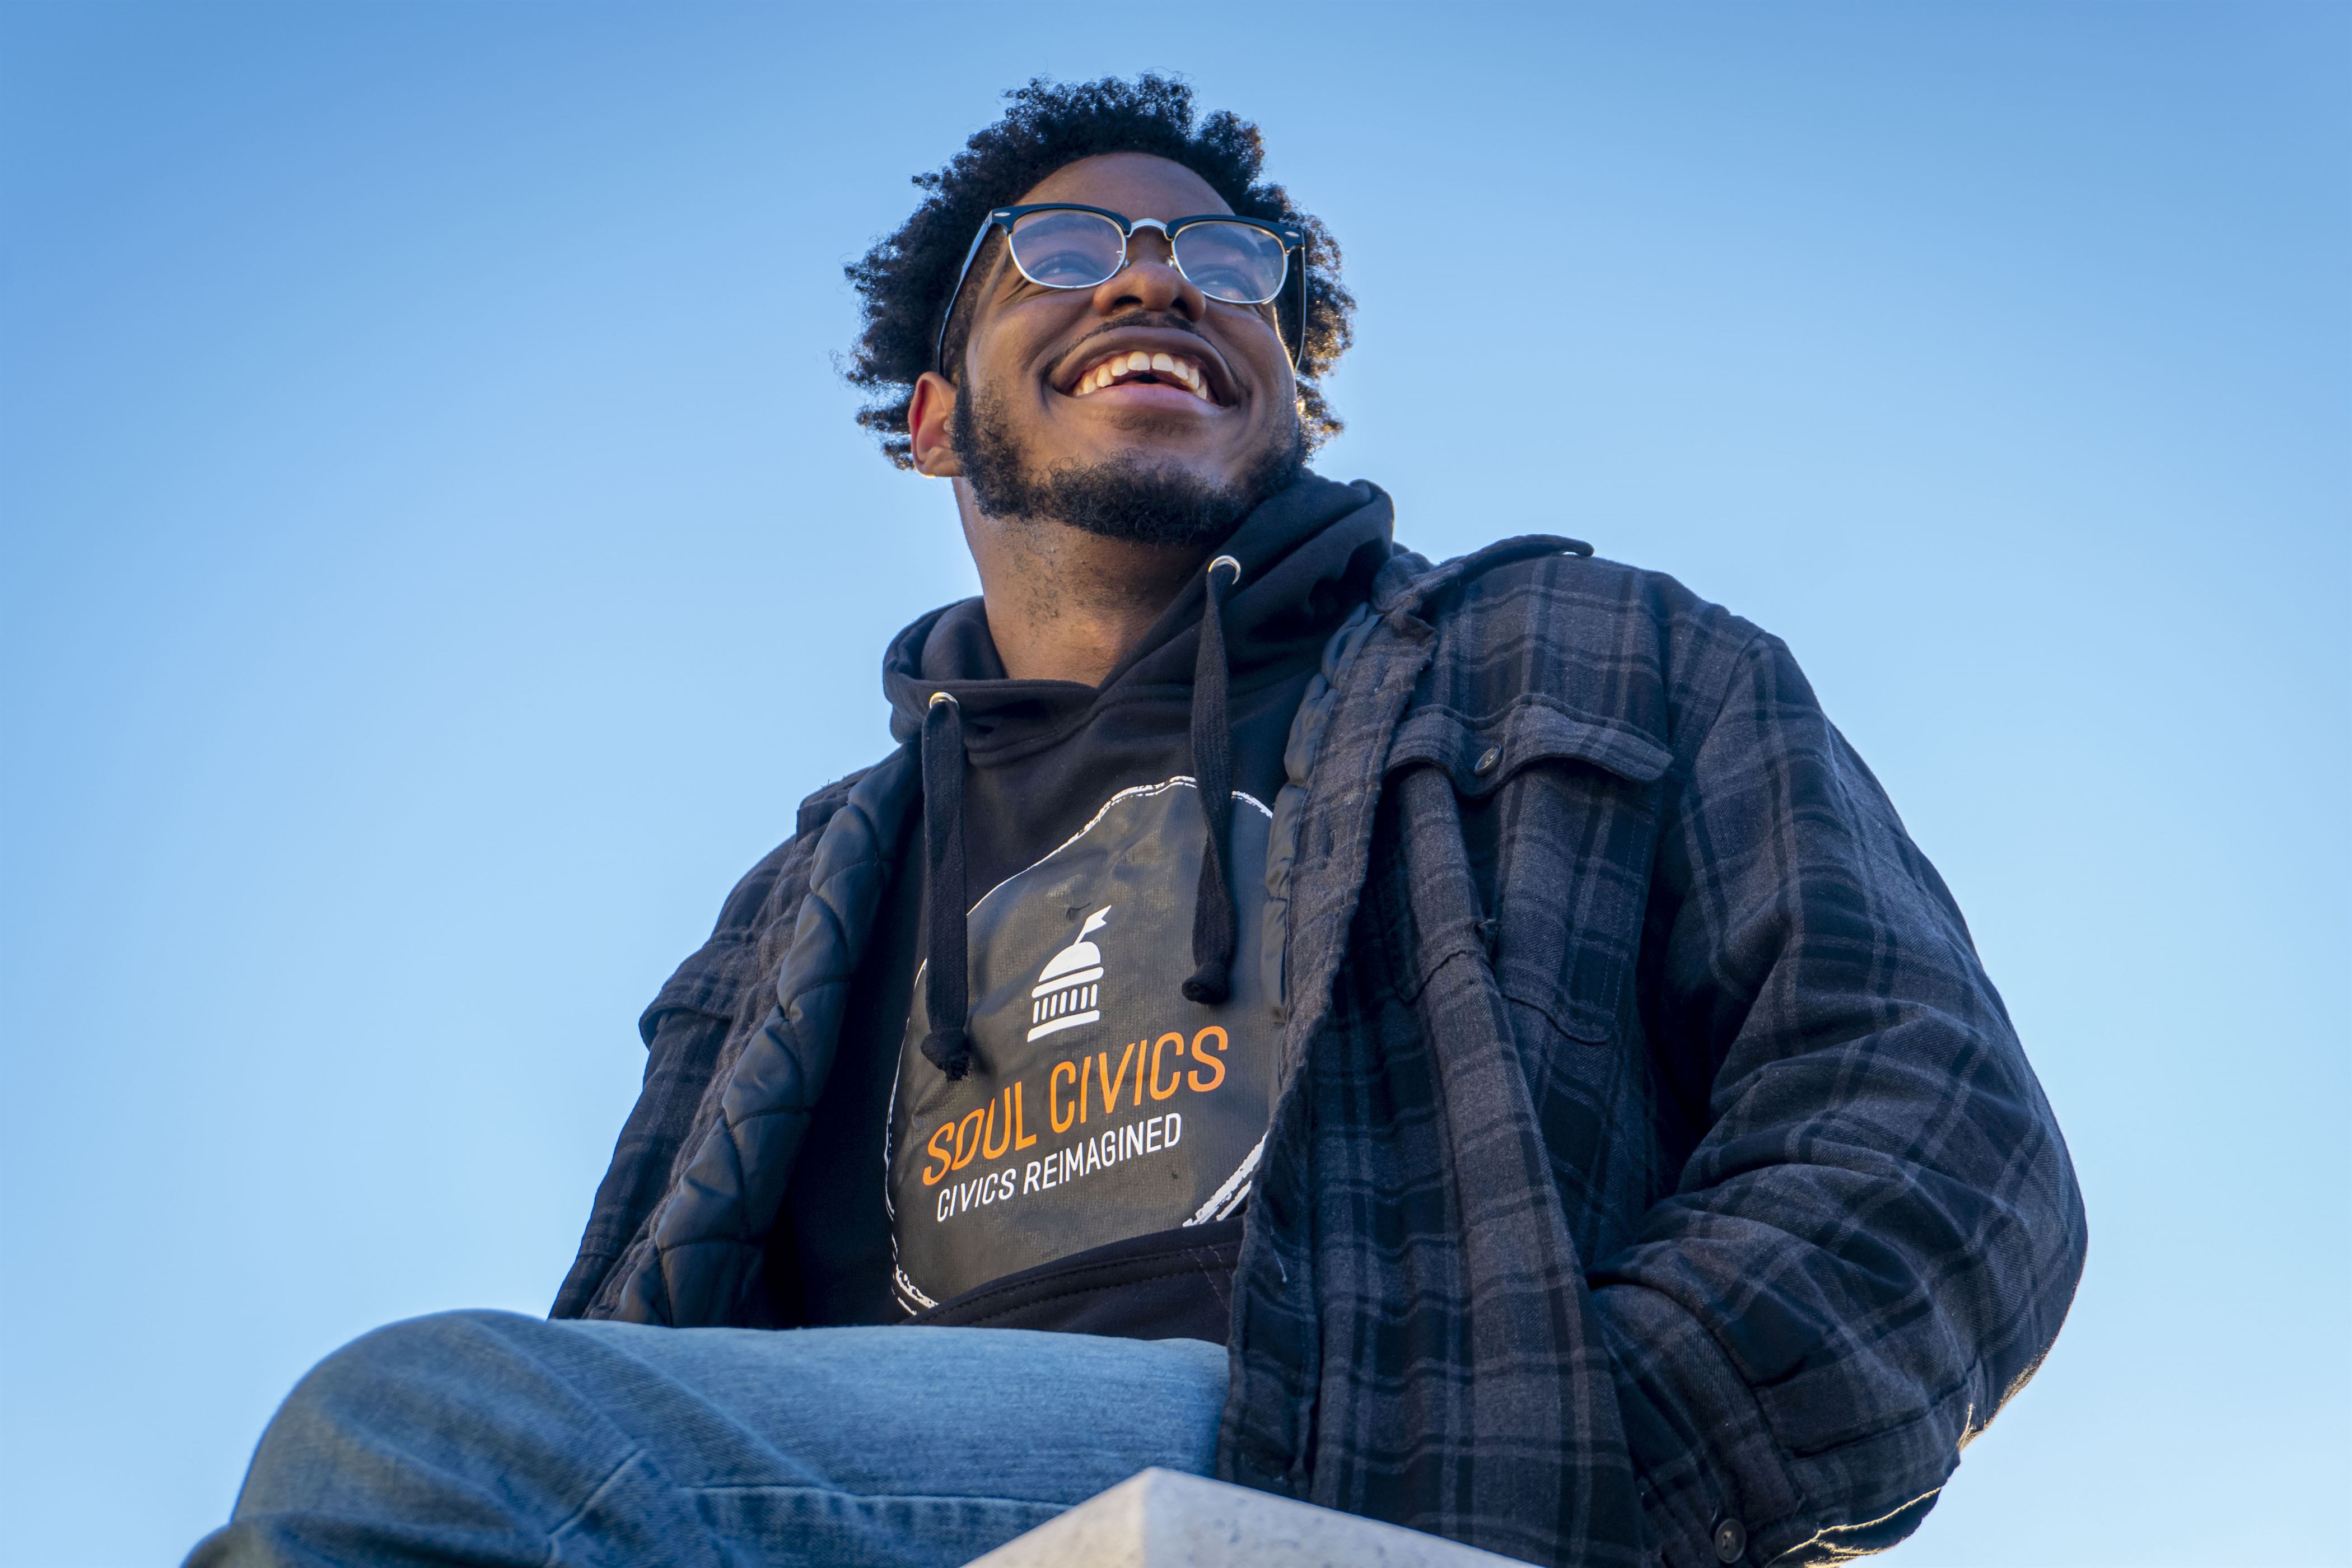 On a ledge, Jordan Stewart, a political science and spanish major, wears his "Soul Civics" sweatshirt. Lynise Olivacce | The Montclarion